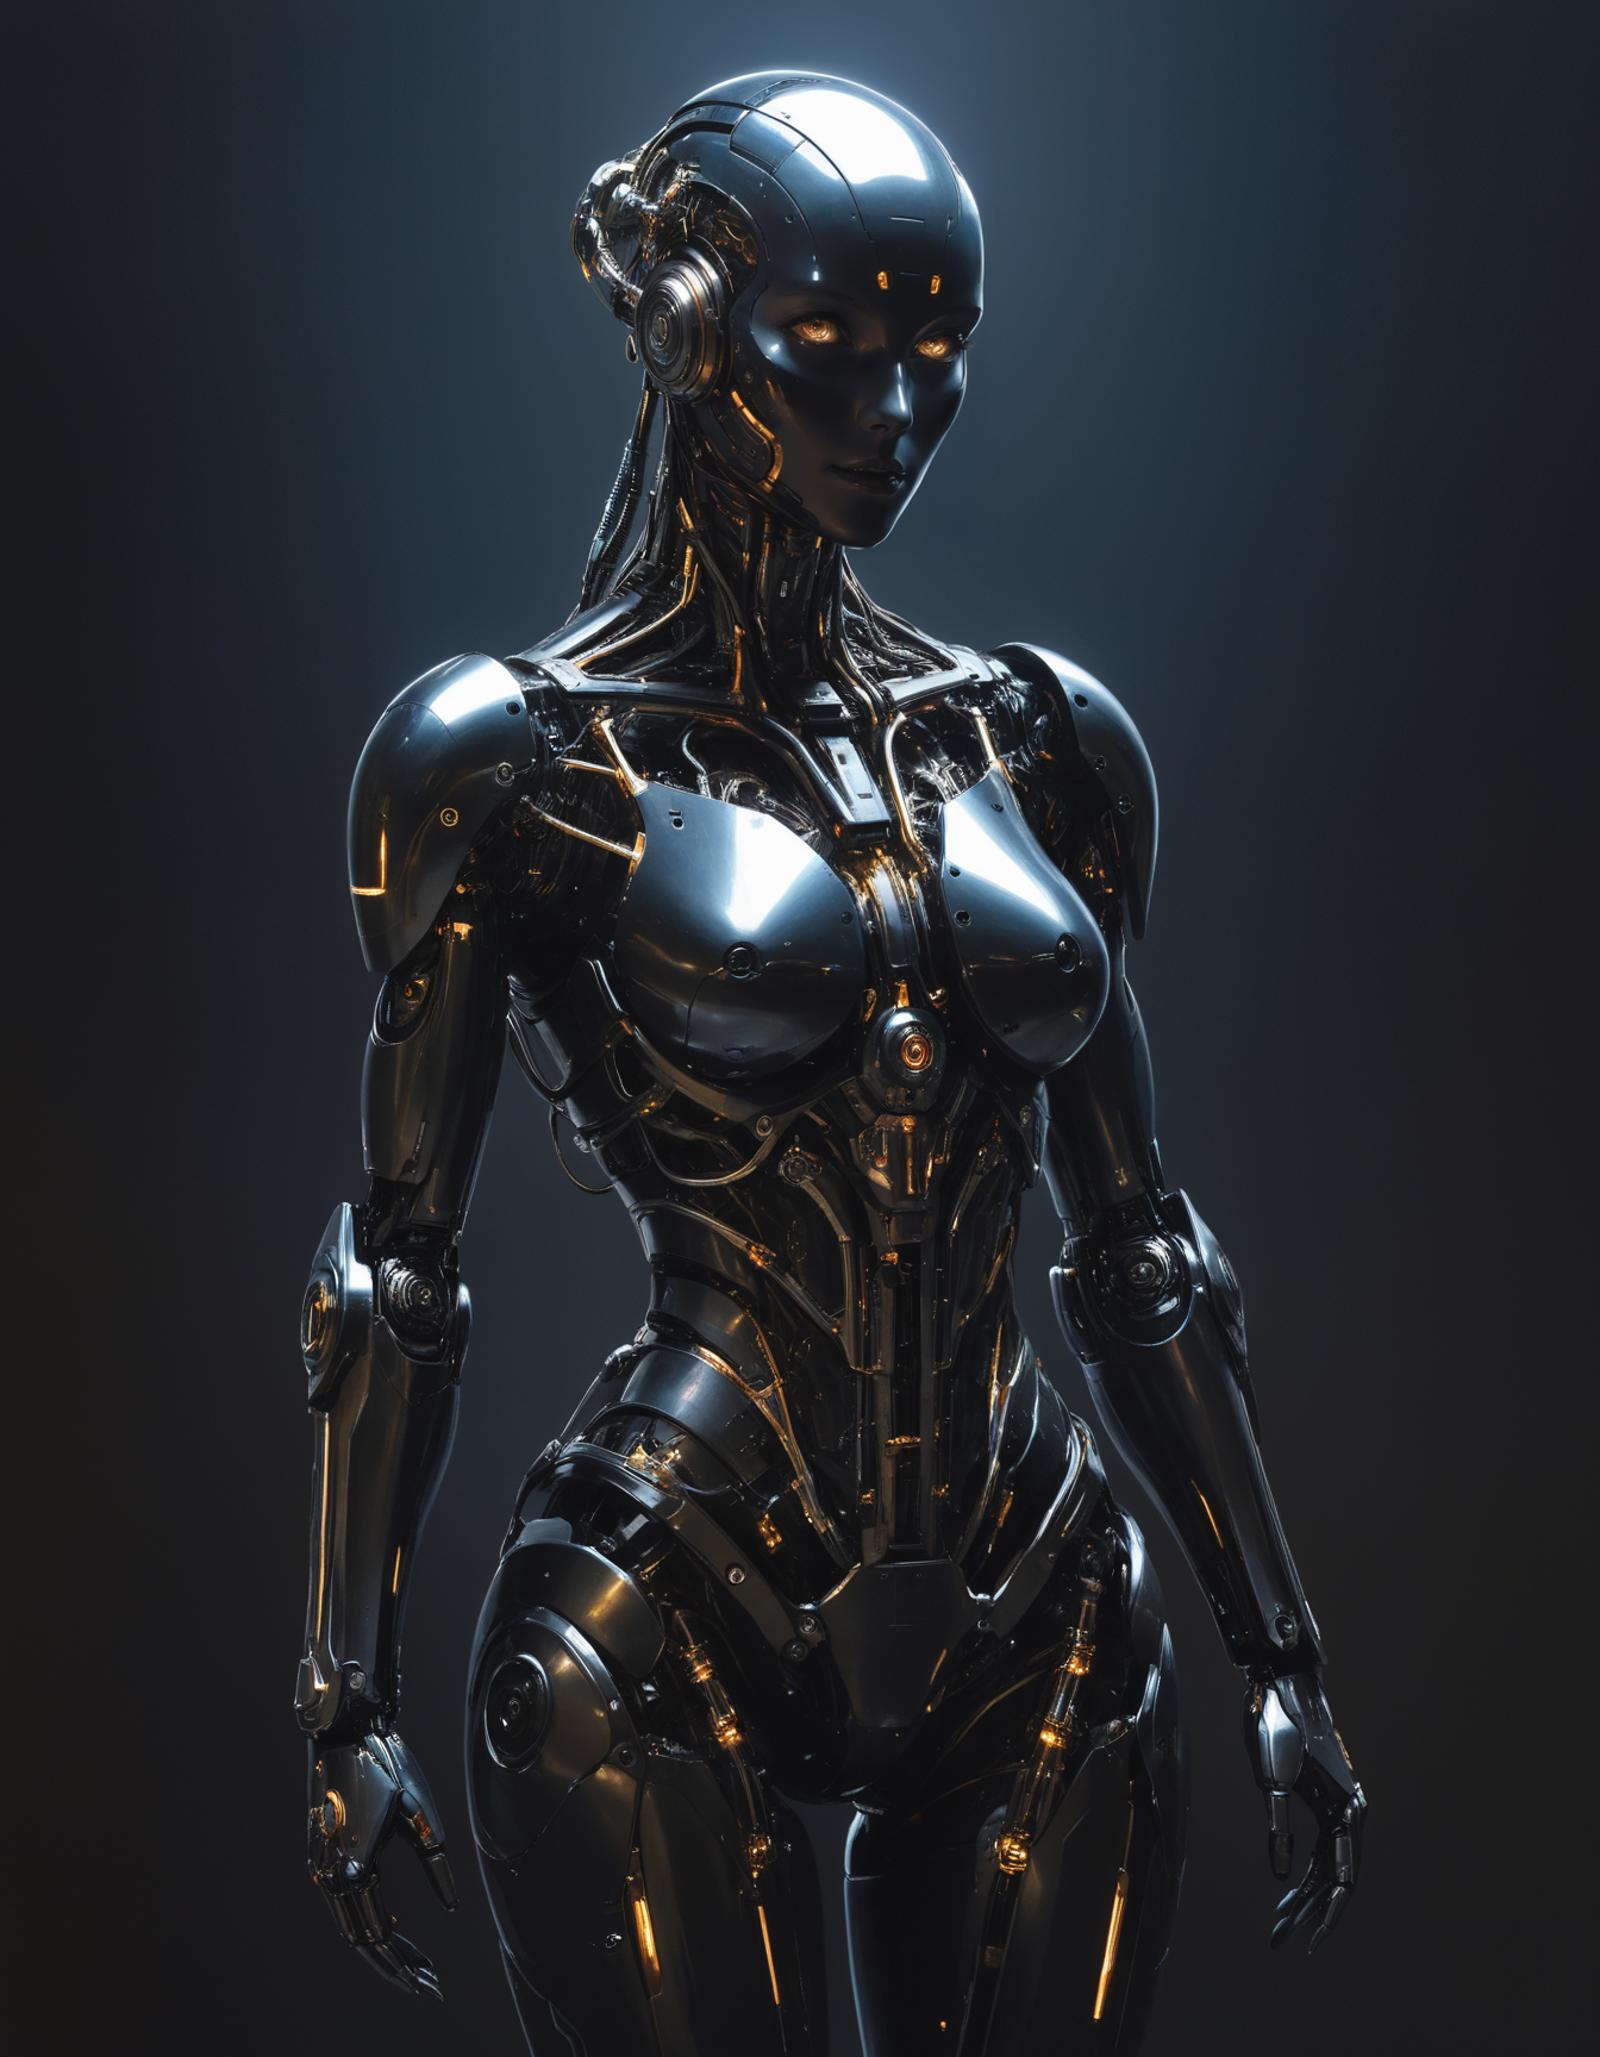 Robot Woman with a Bionic Body and Golden Face.